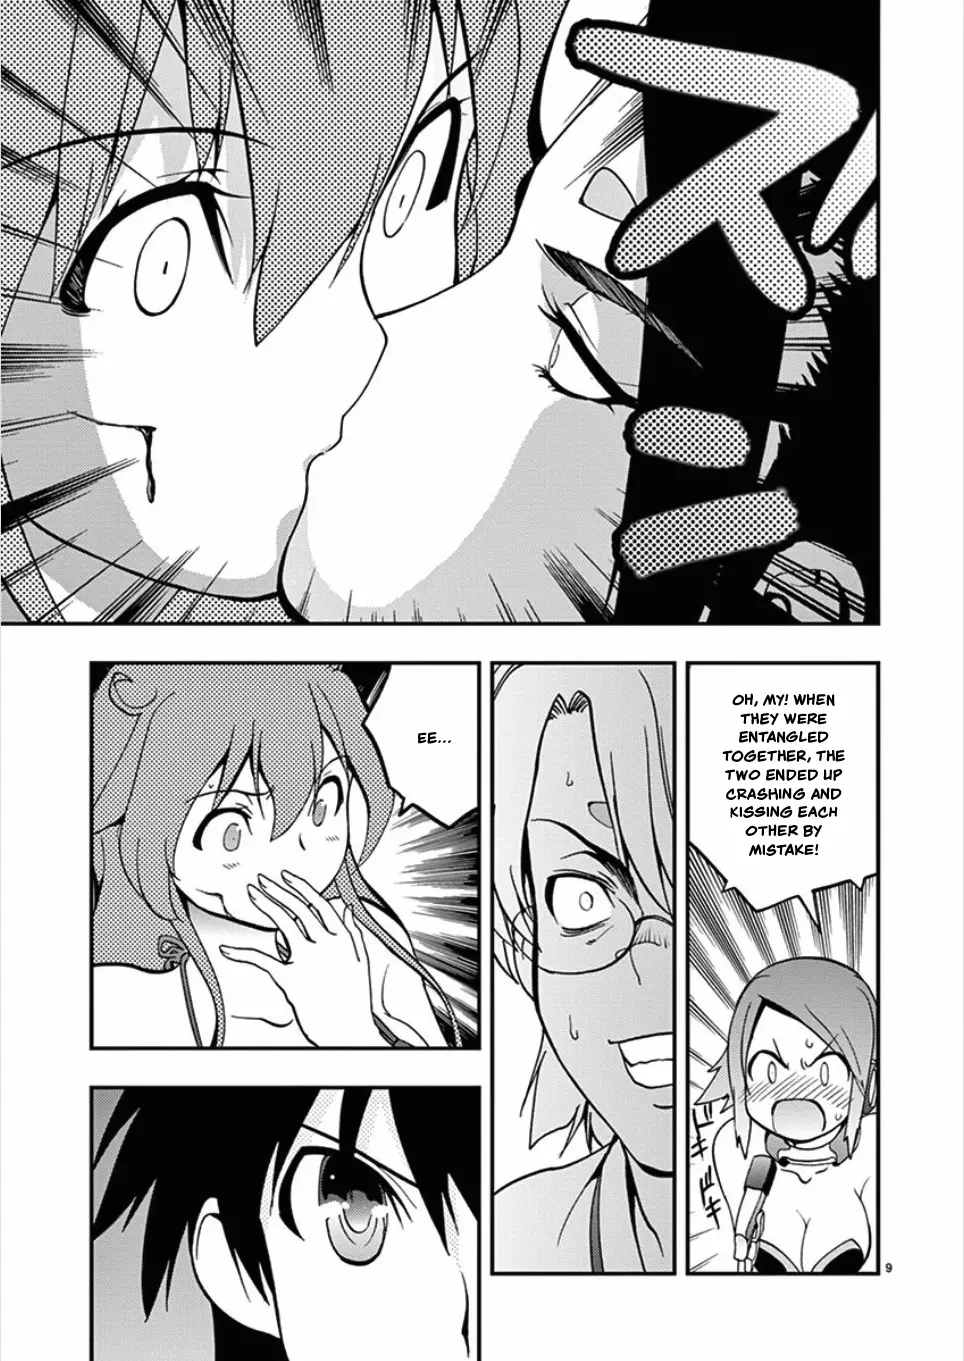 Card Girl! Maiden Summoning Undressing Wars - 58 page 9-6d43e5d5